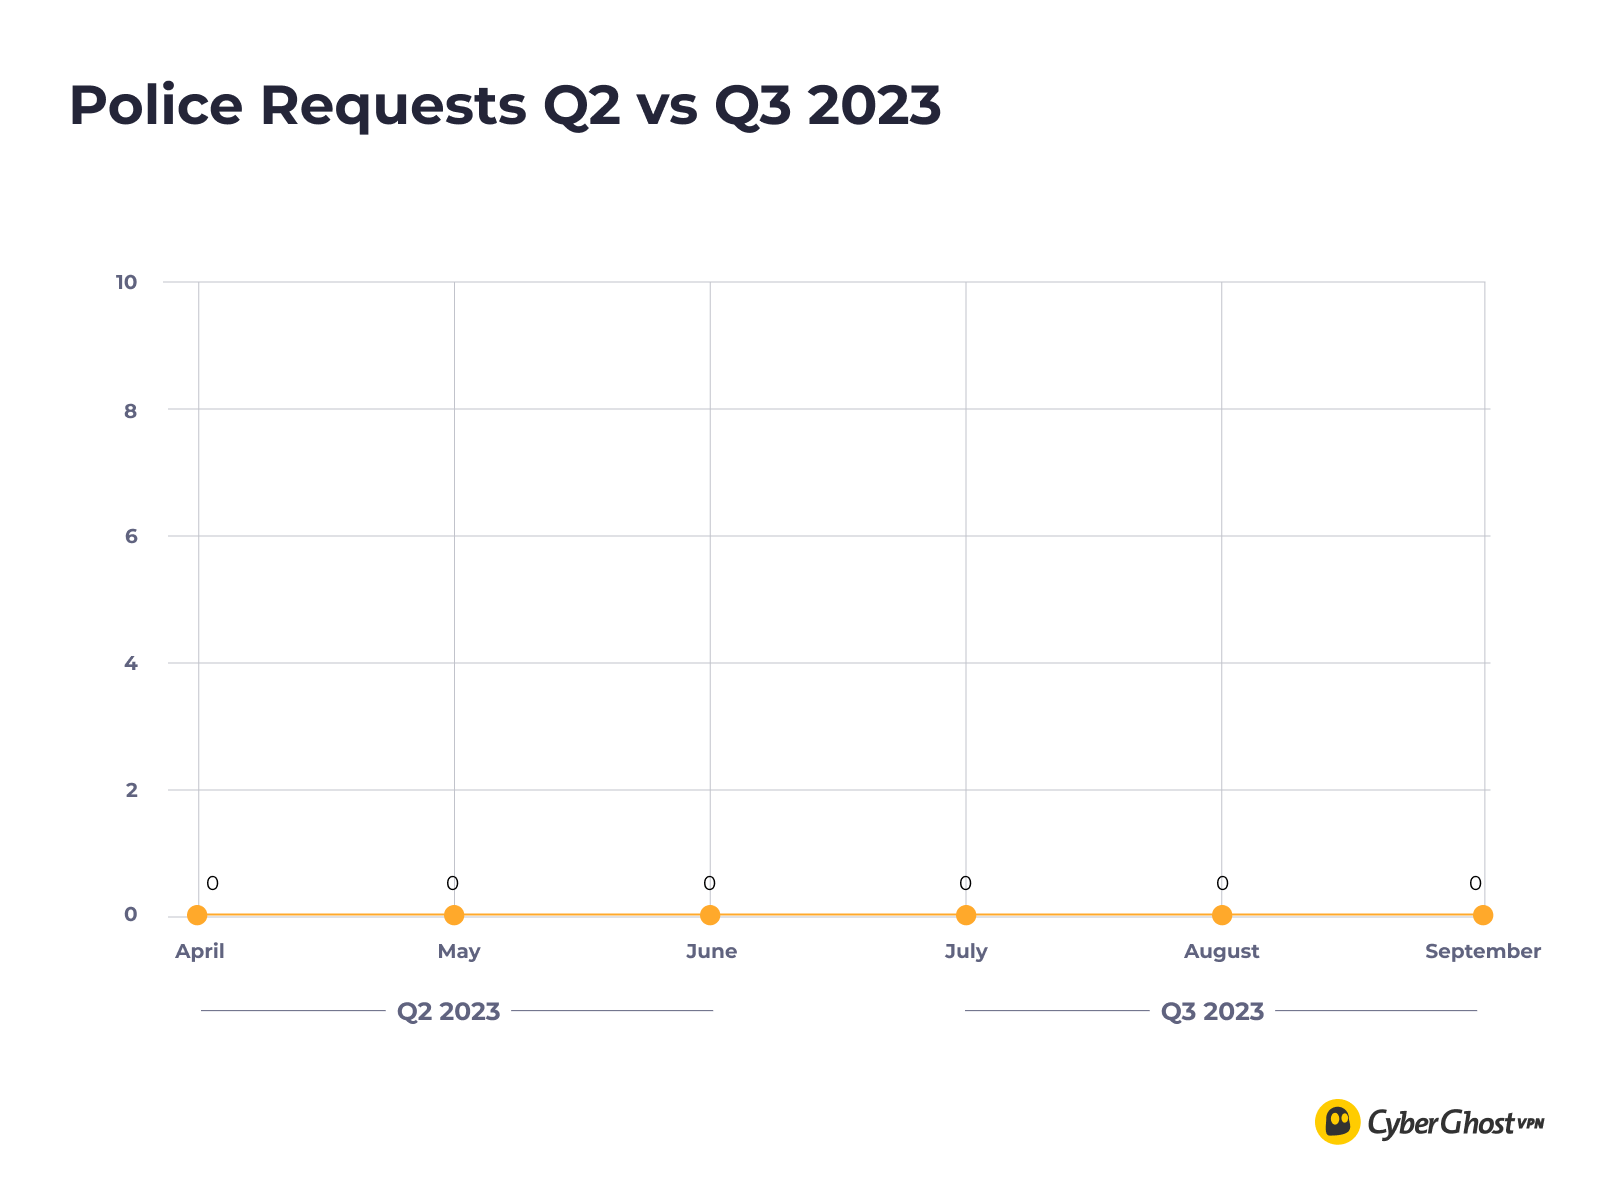 CyberGhost VPN's Quarterly Transparency Report numbers for Police Requests Q3 2023